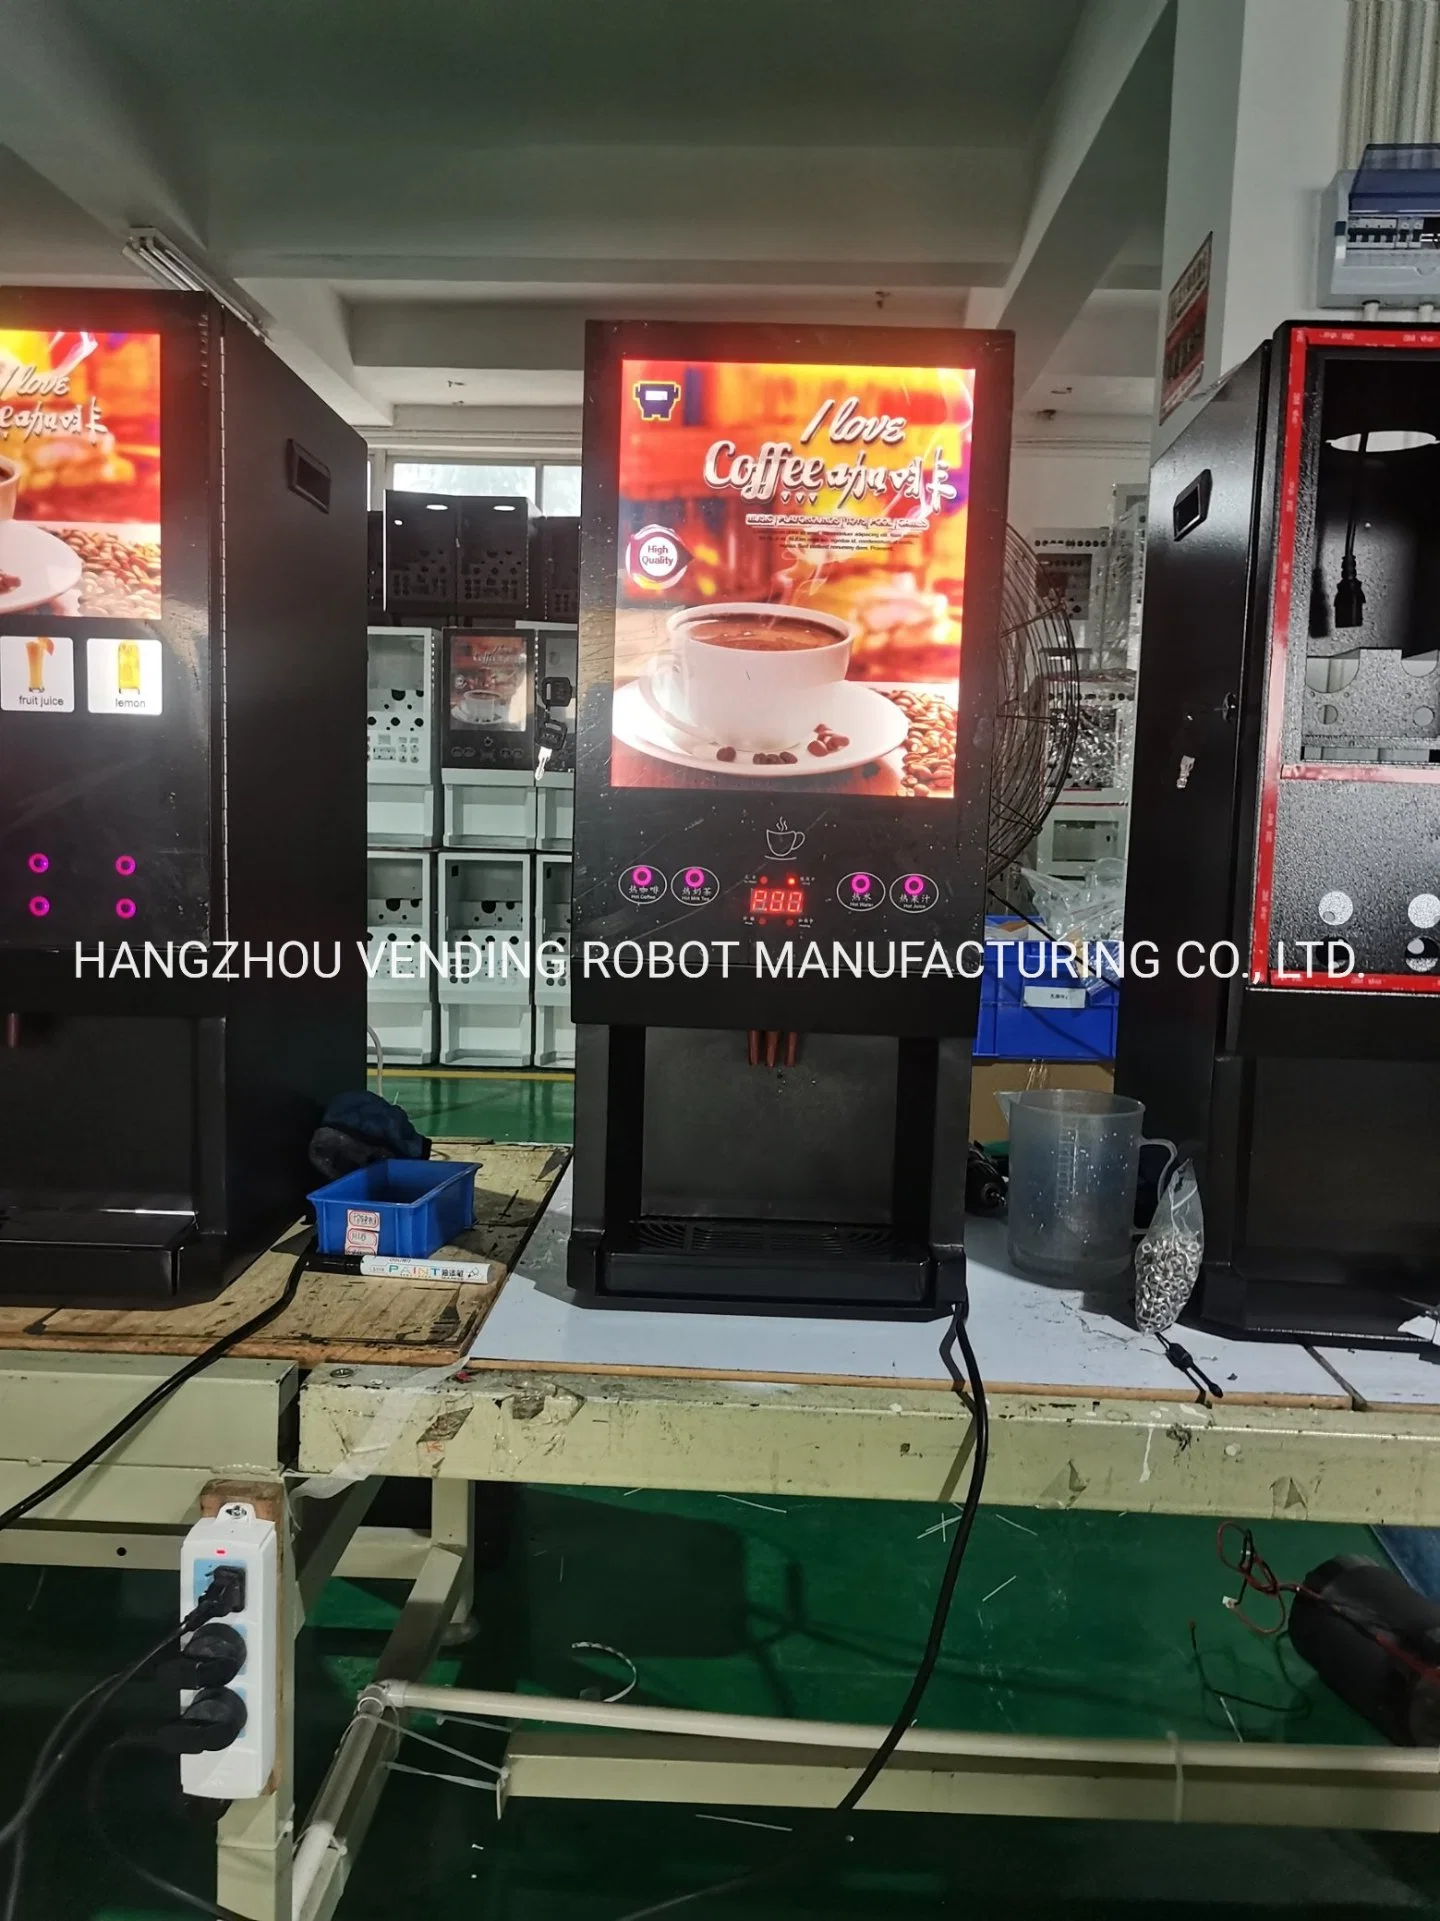 3 Hot Drink 1 Hot Water Table Top Coffee Hot Chocolate Vending Machine Fot Restaurant Wf1-303A